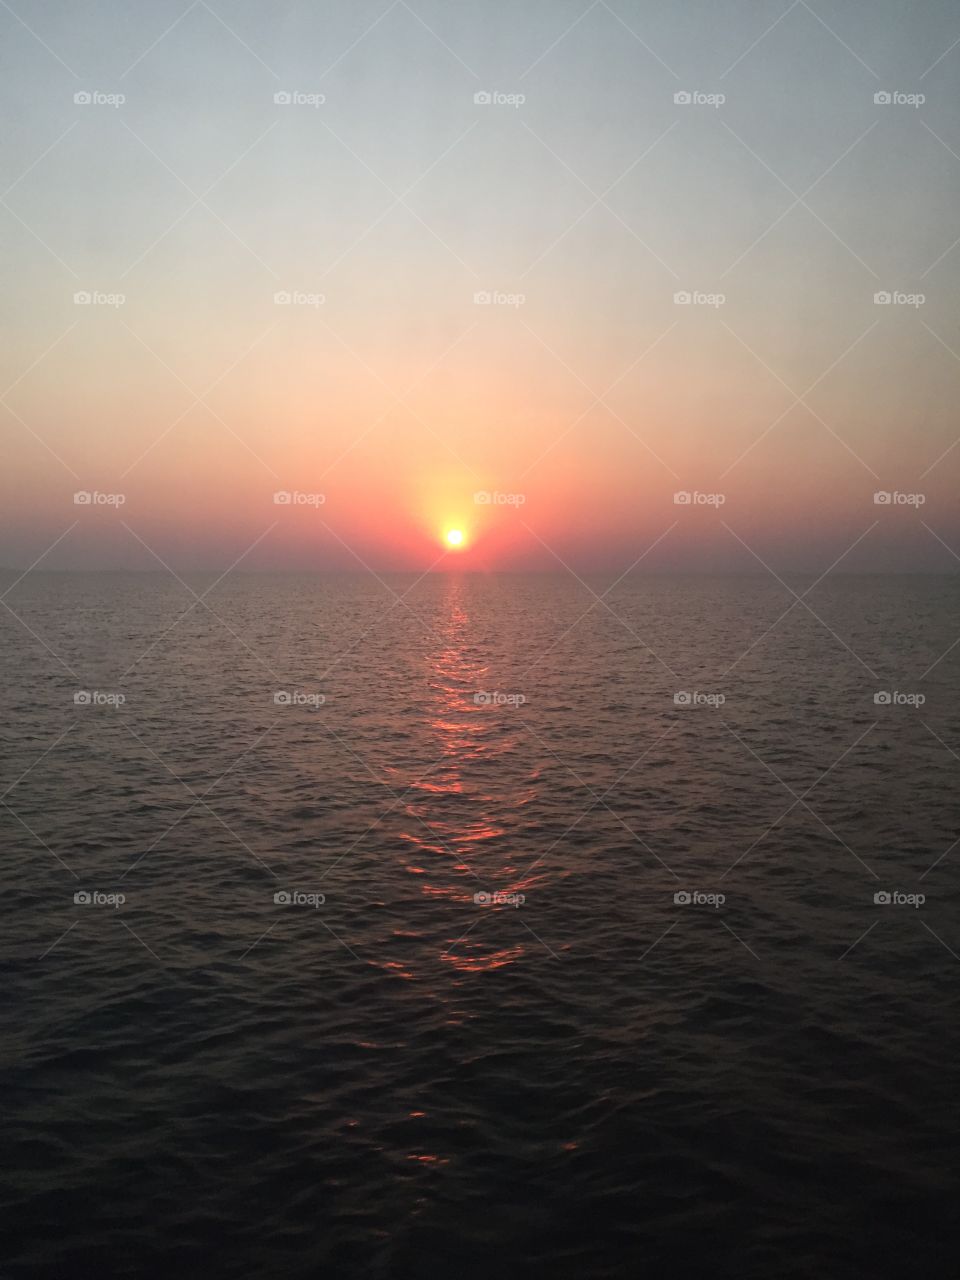 My view of the sunset while on board Ferry Yameela to Mugharag Port.